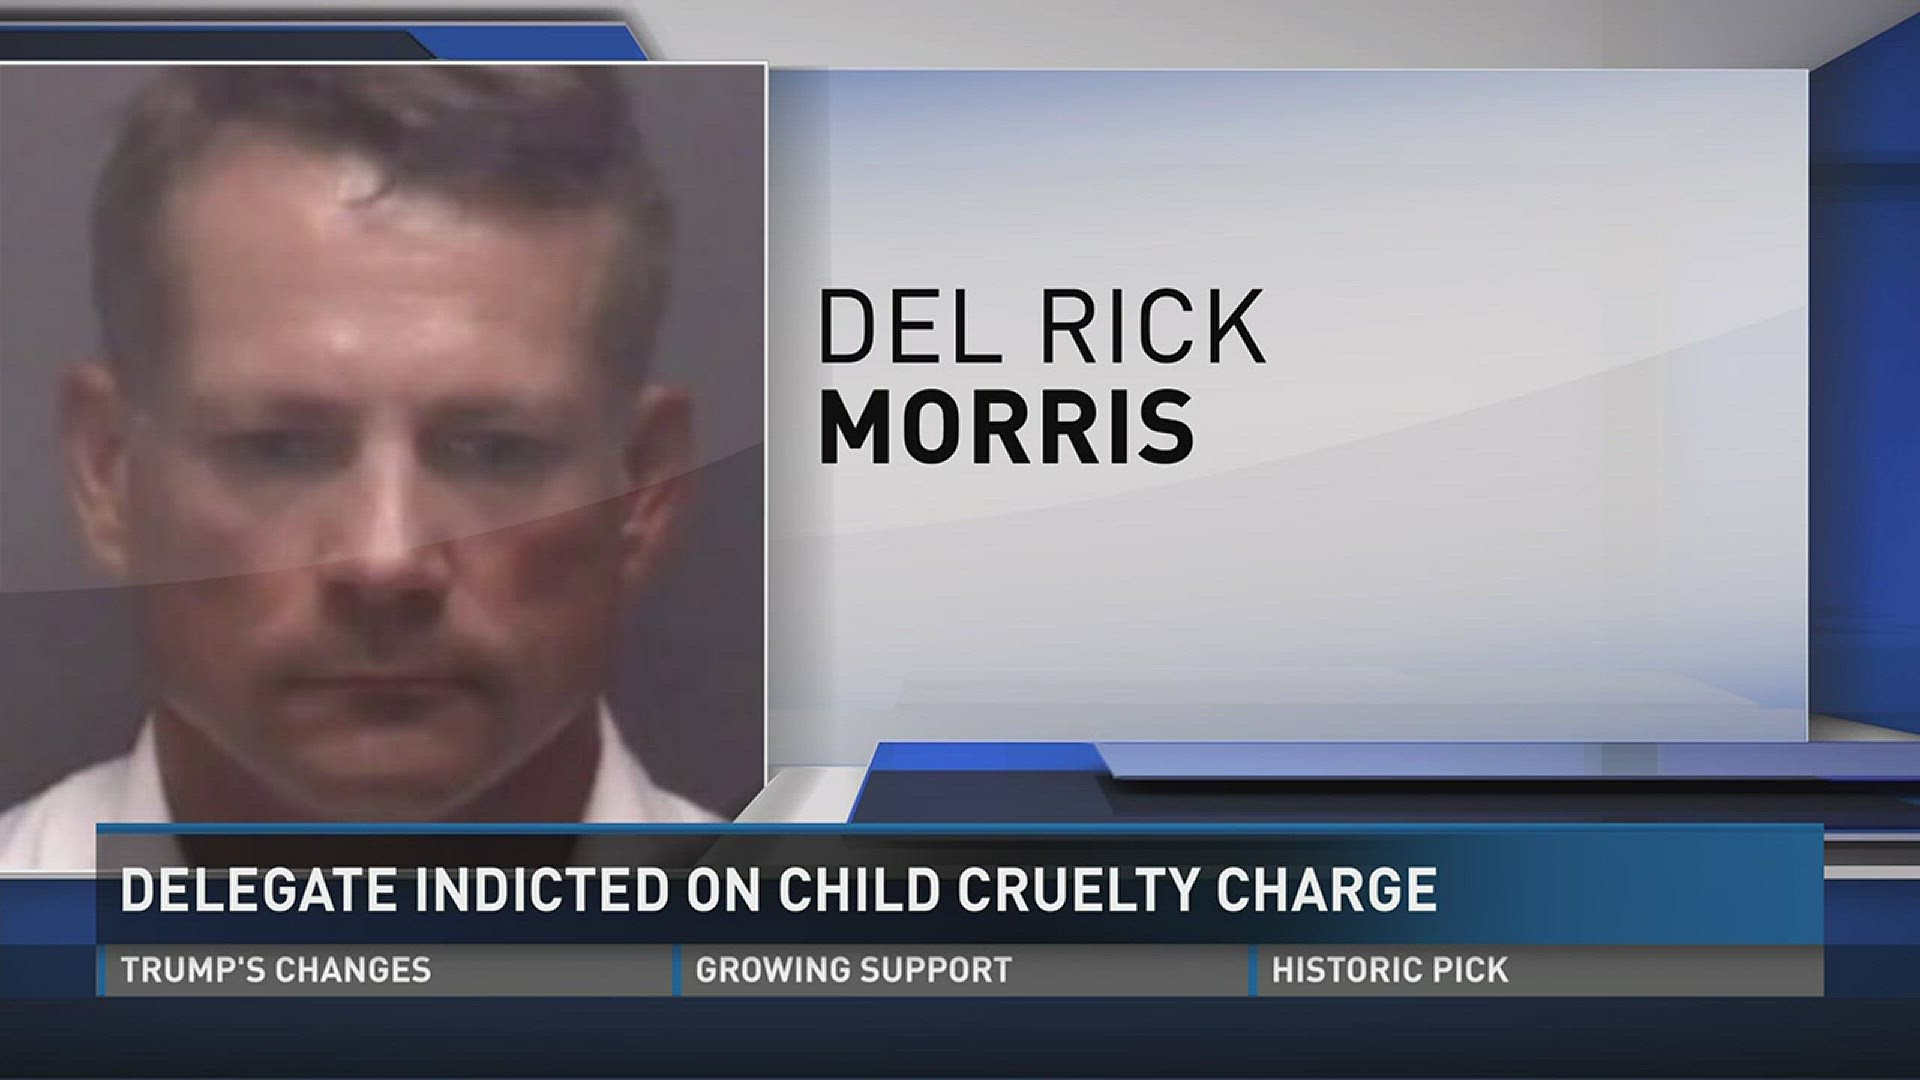 Suffolk Delegate indicted on child cruelty charge